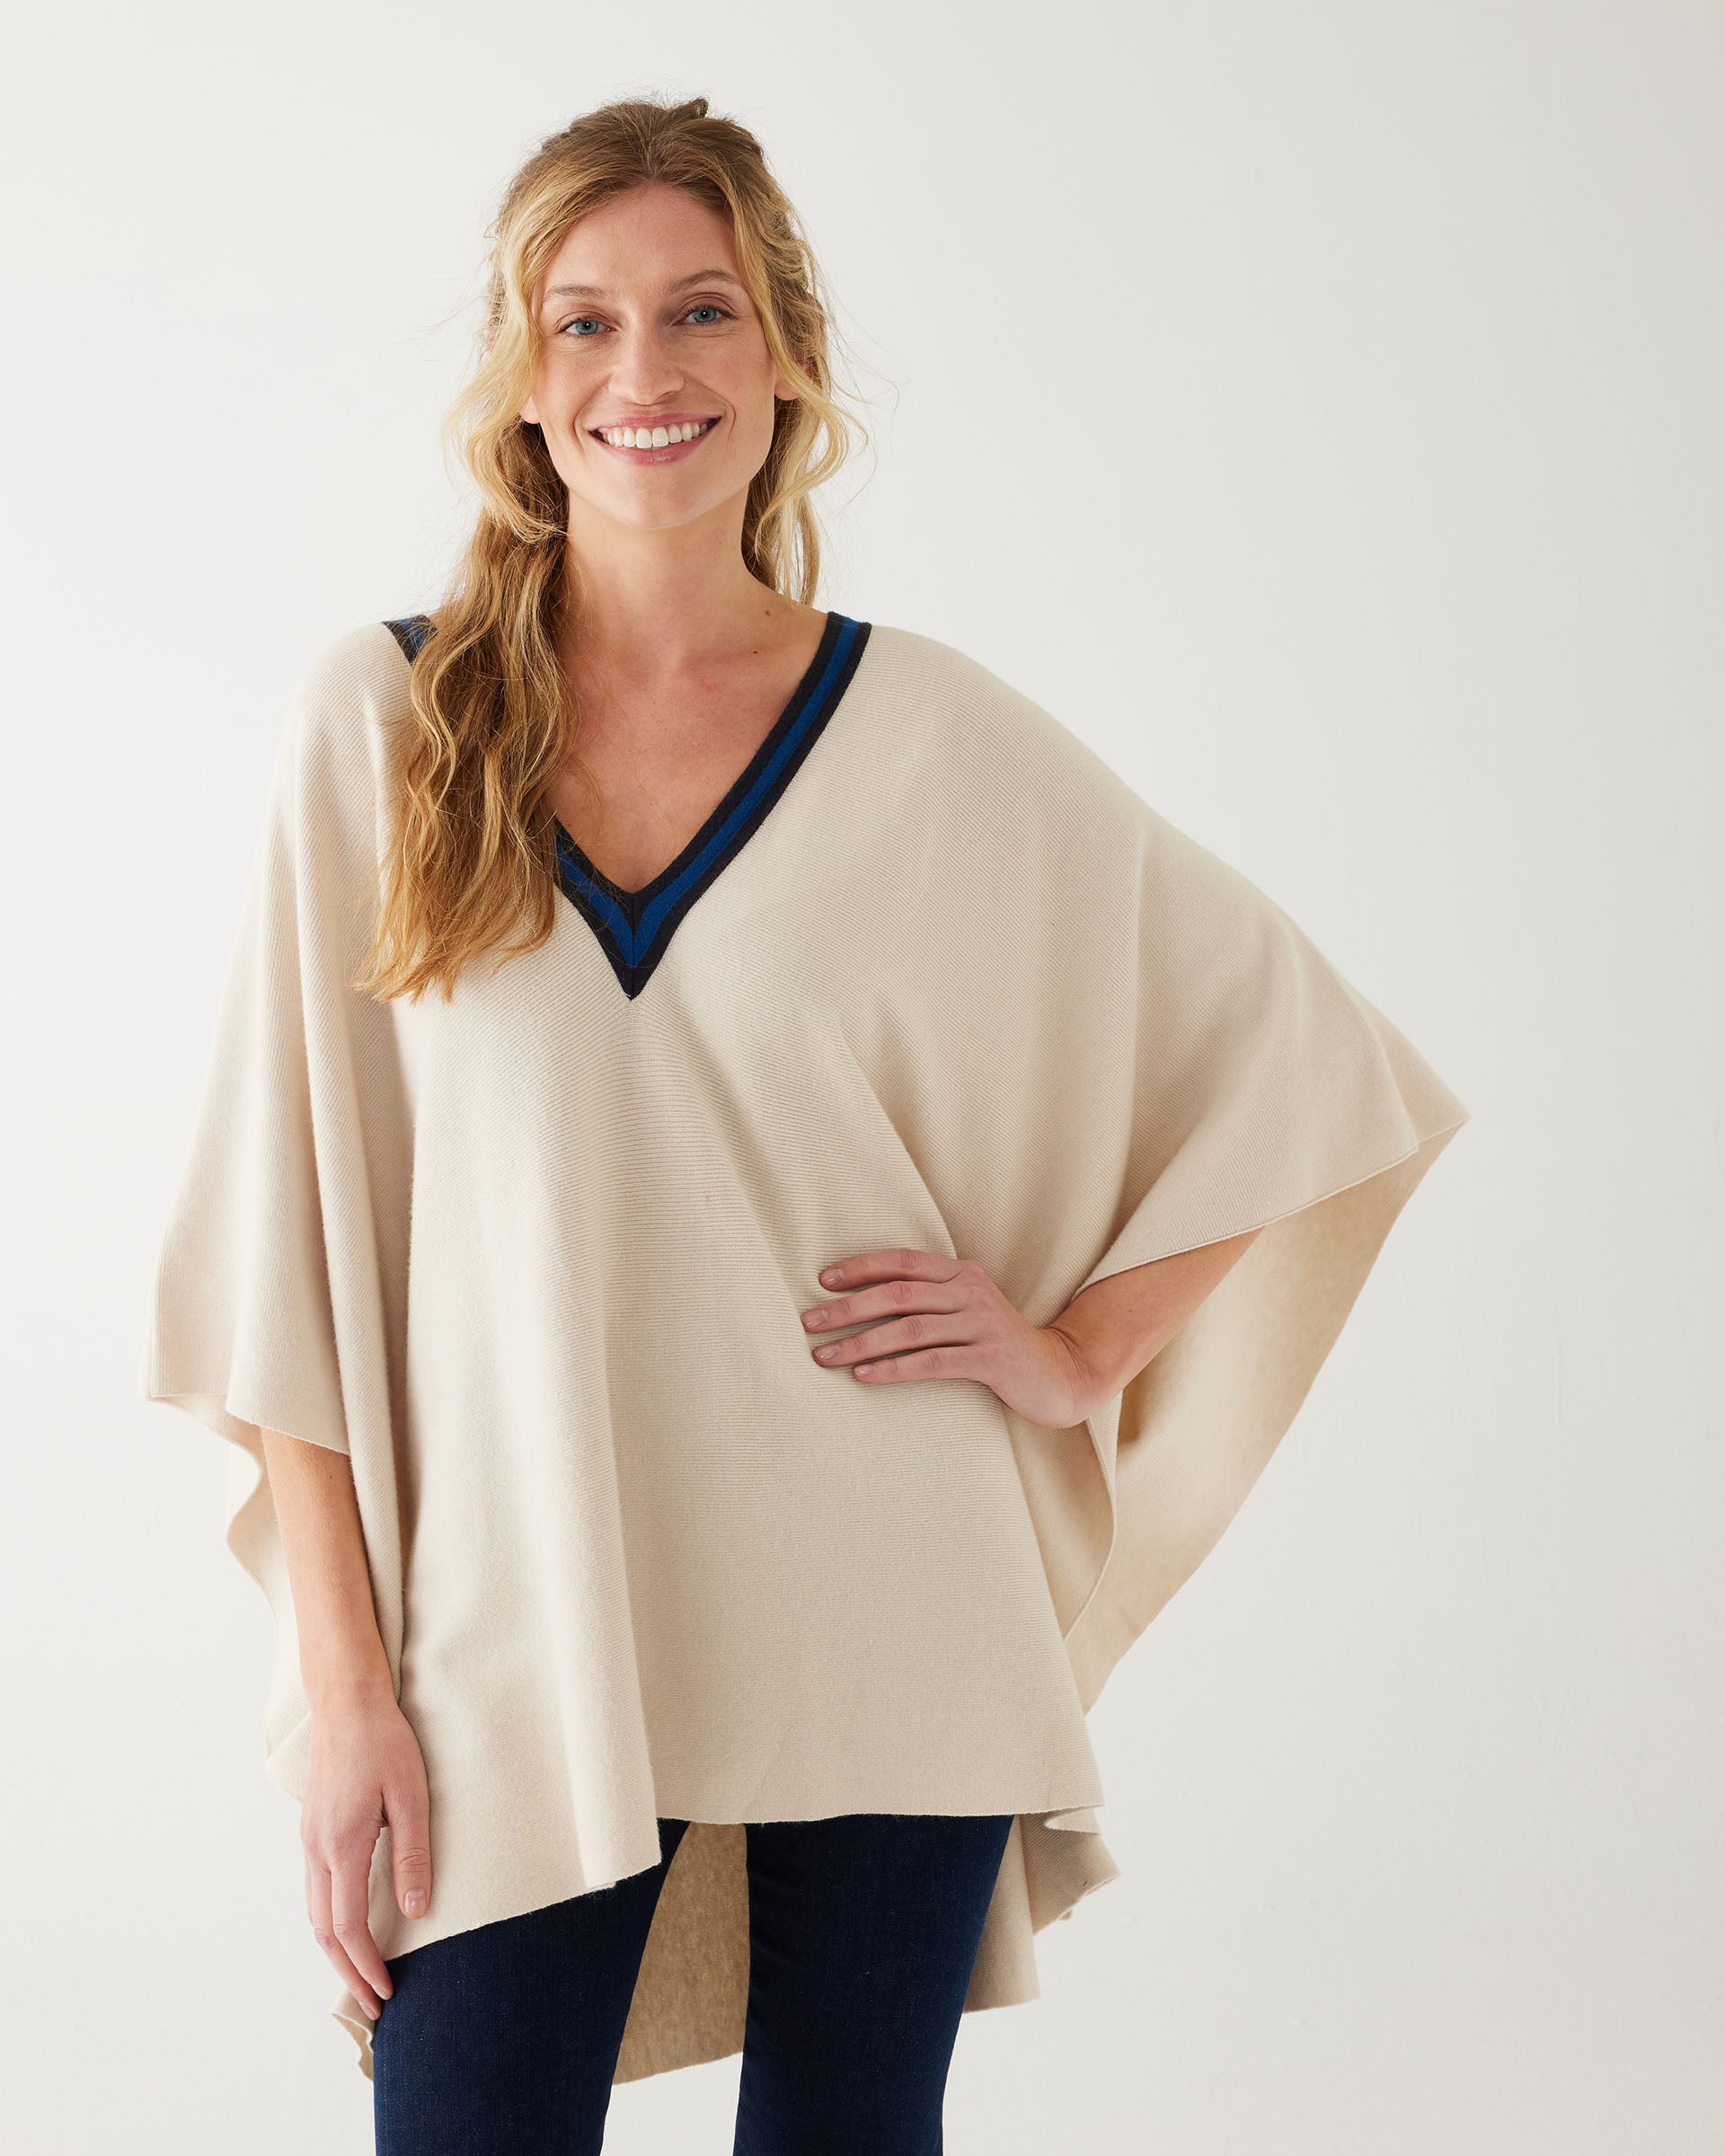 woman wearing mersea Anywear v new poncho in birch beige with blue collar details